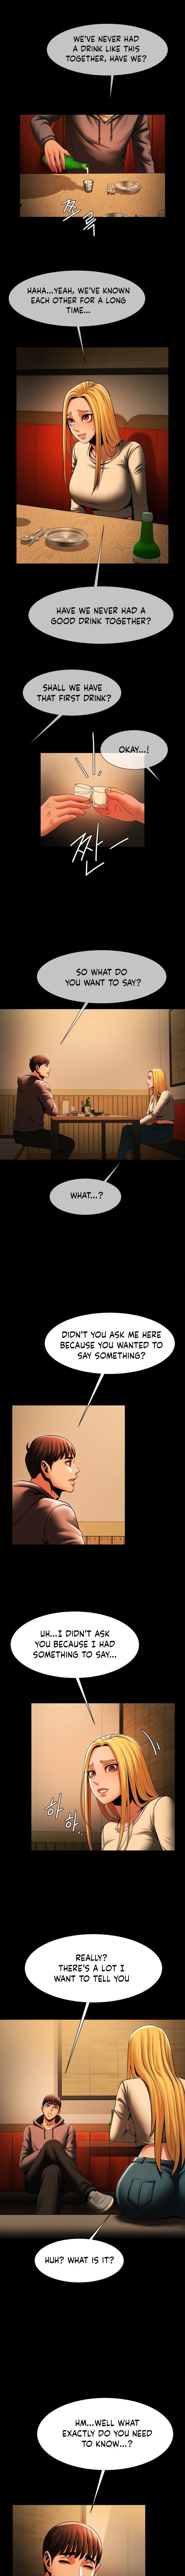 Under the Radar Chapter 7 - Page 9